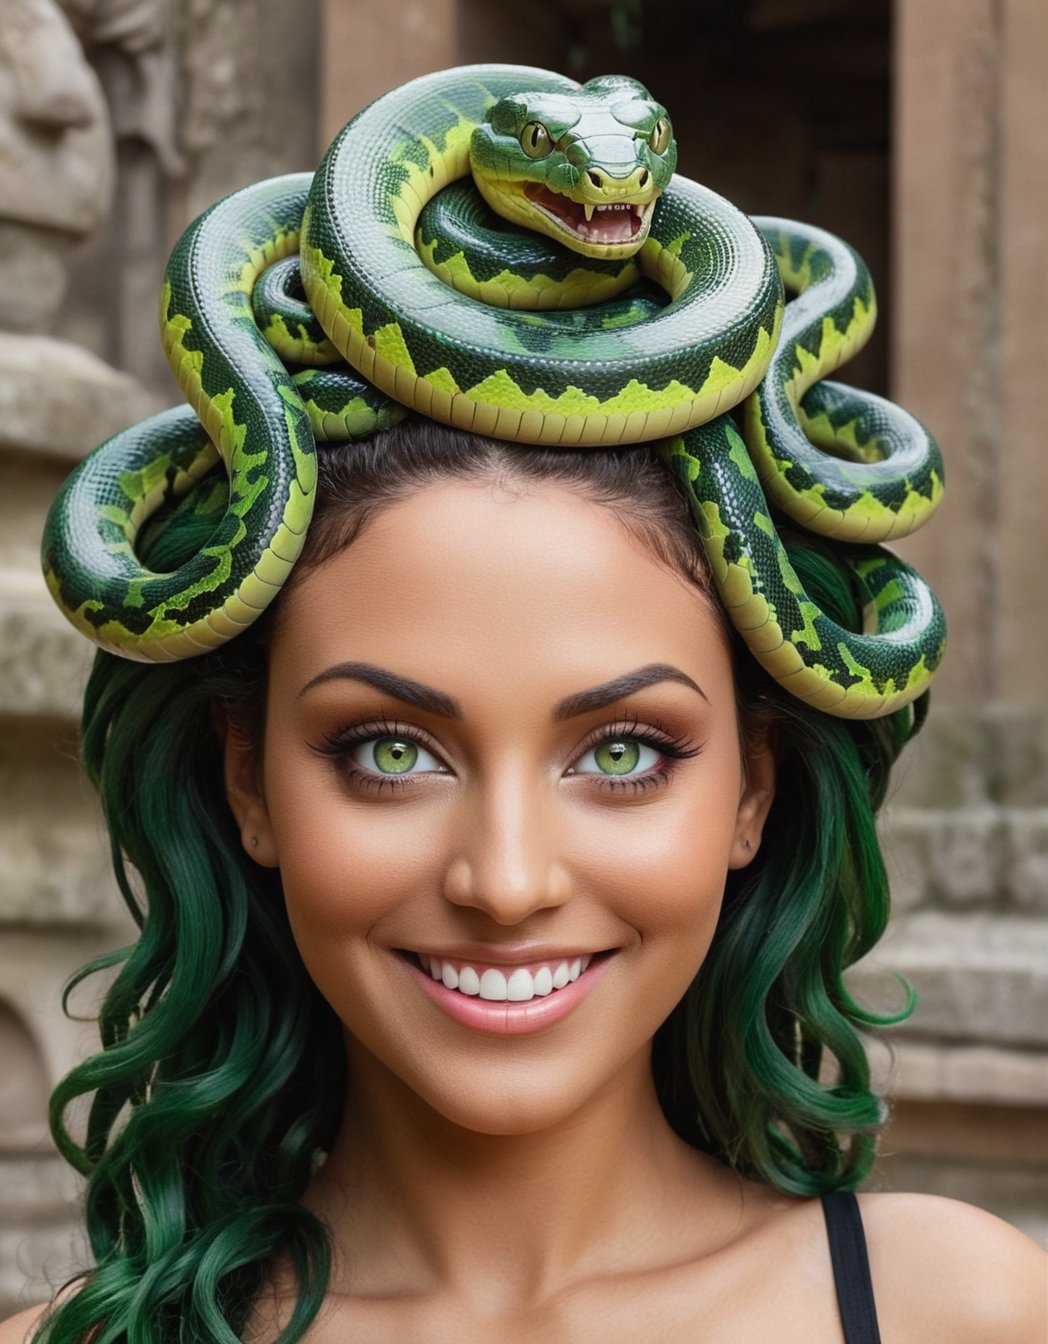 ((ultra realistic)), hyper details, best quality, beautifull exotic ((Medusa)), (Head with snakes instead of hair), smiling, (big bright green eyes), perfect skin, snake looking camera, (background of an ancient temple), masterpiece, cinematic moviemaker style